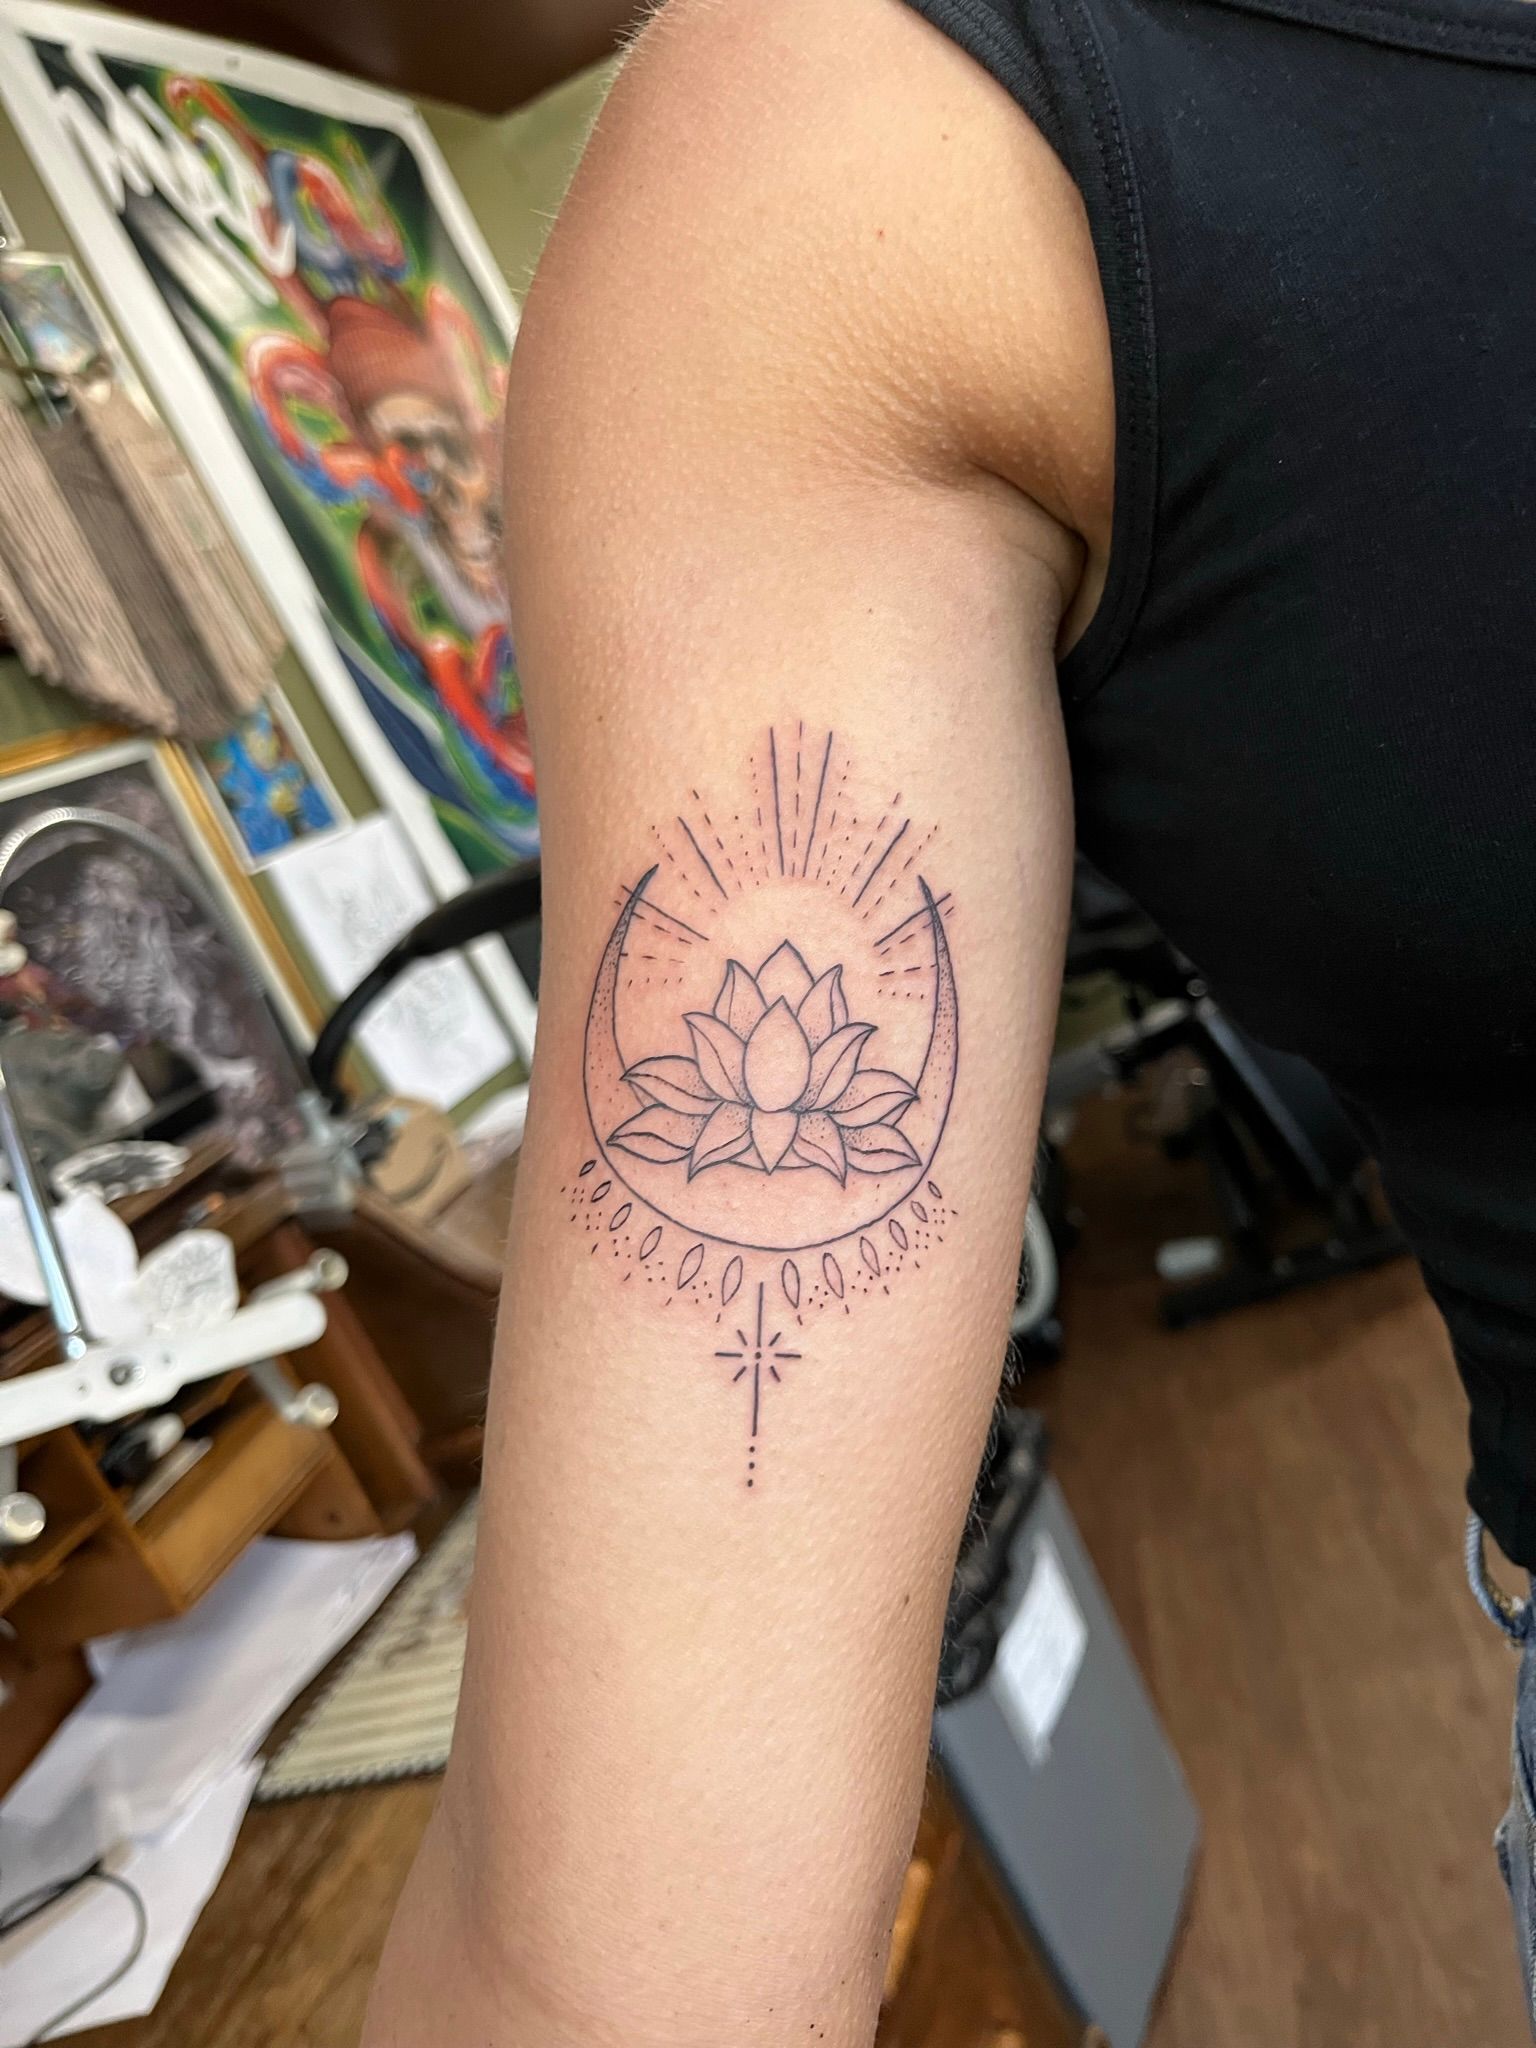 Hawkmoth Tattoo Auckland - By Upseta Pohutukawa flower. thanks Tyler for  letting me do your tattoo! ⚡️HAWKMOTH TATTOO (0220945720) - 157a Symonds  street, Eden Terrace, Auckland CBD, New Zealand. Monday - Sunday,